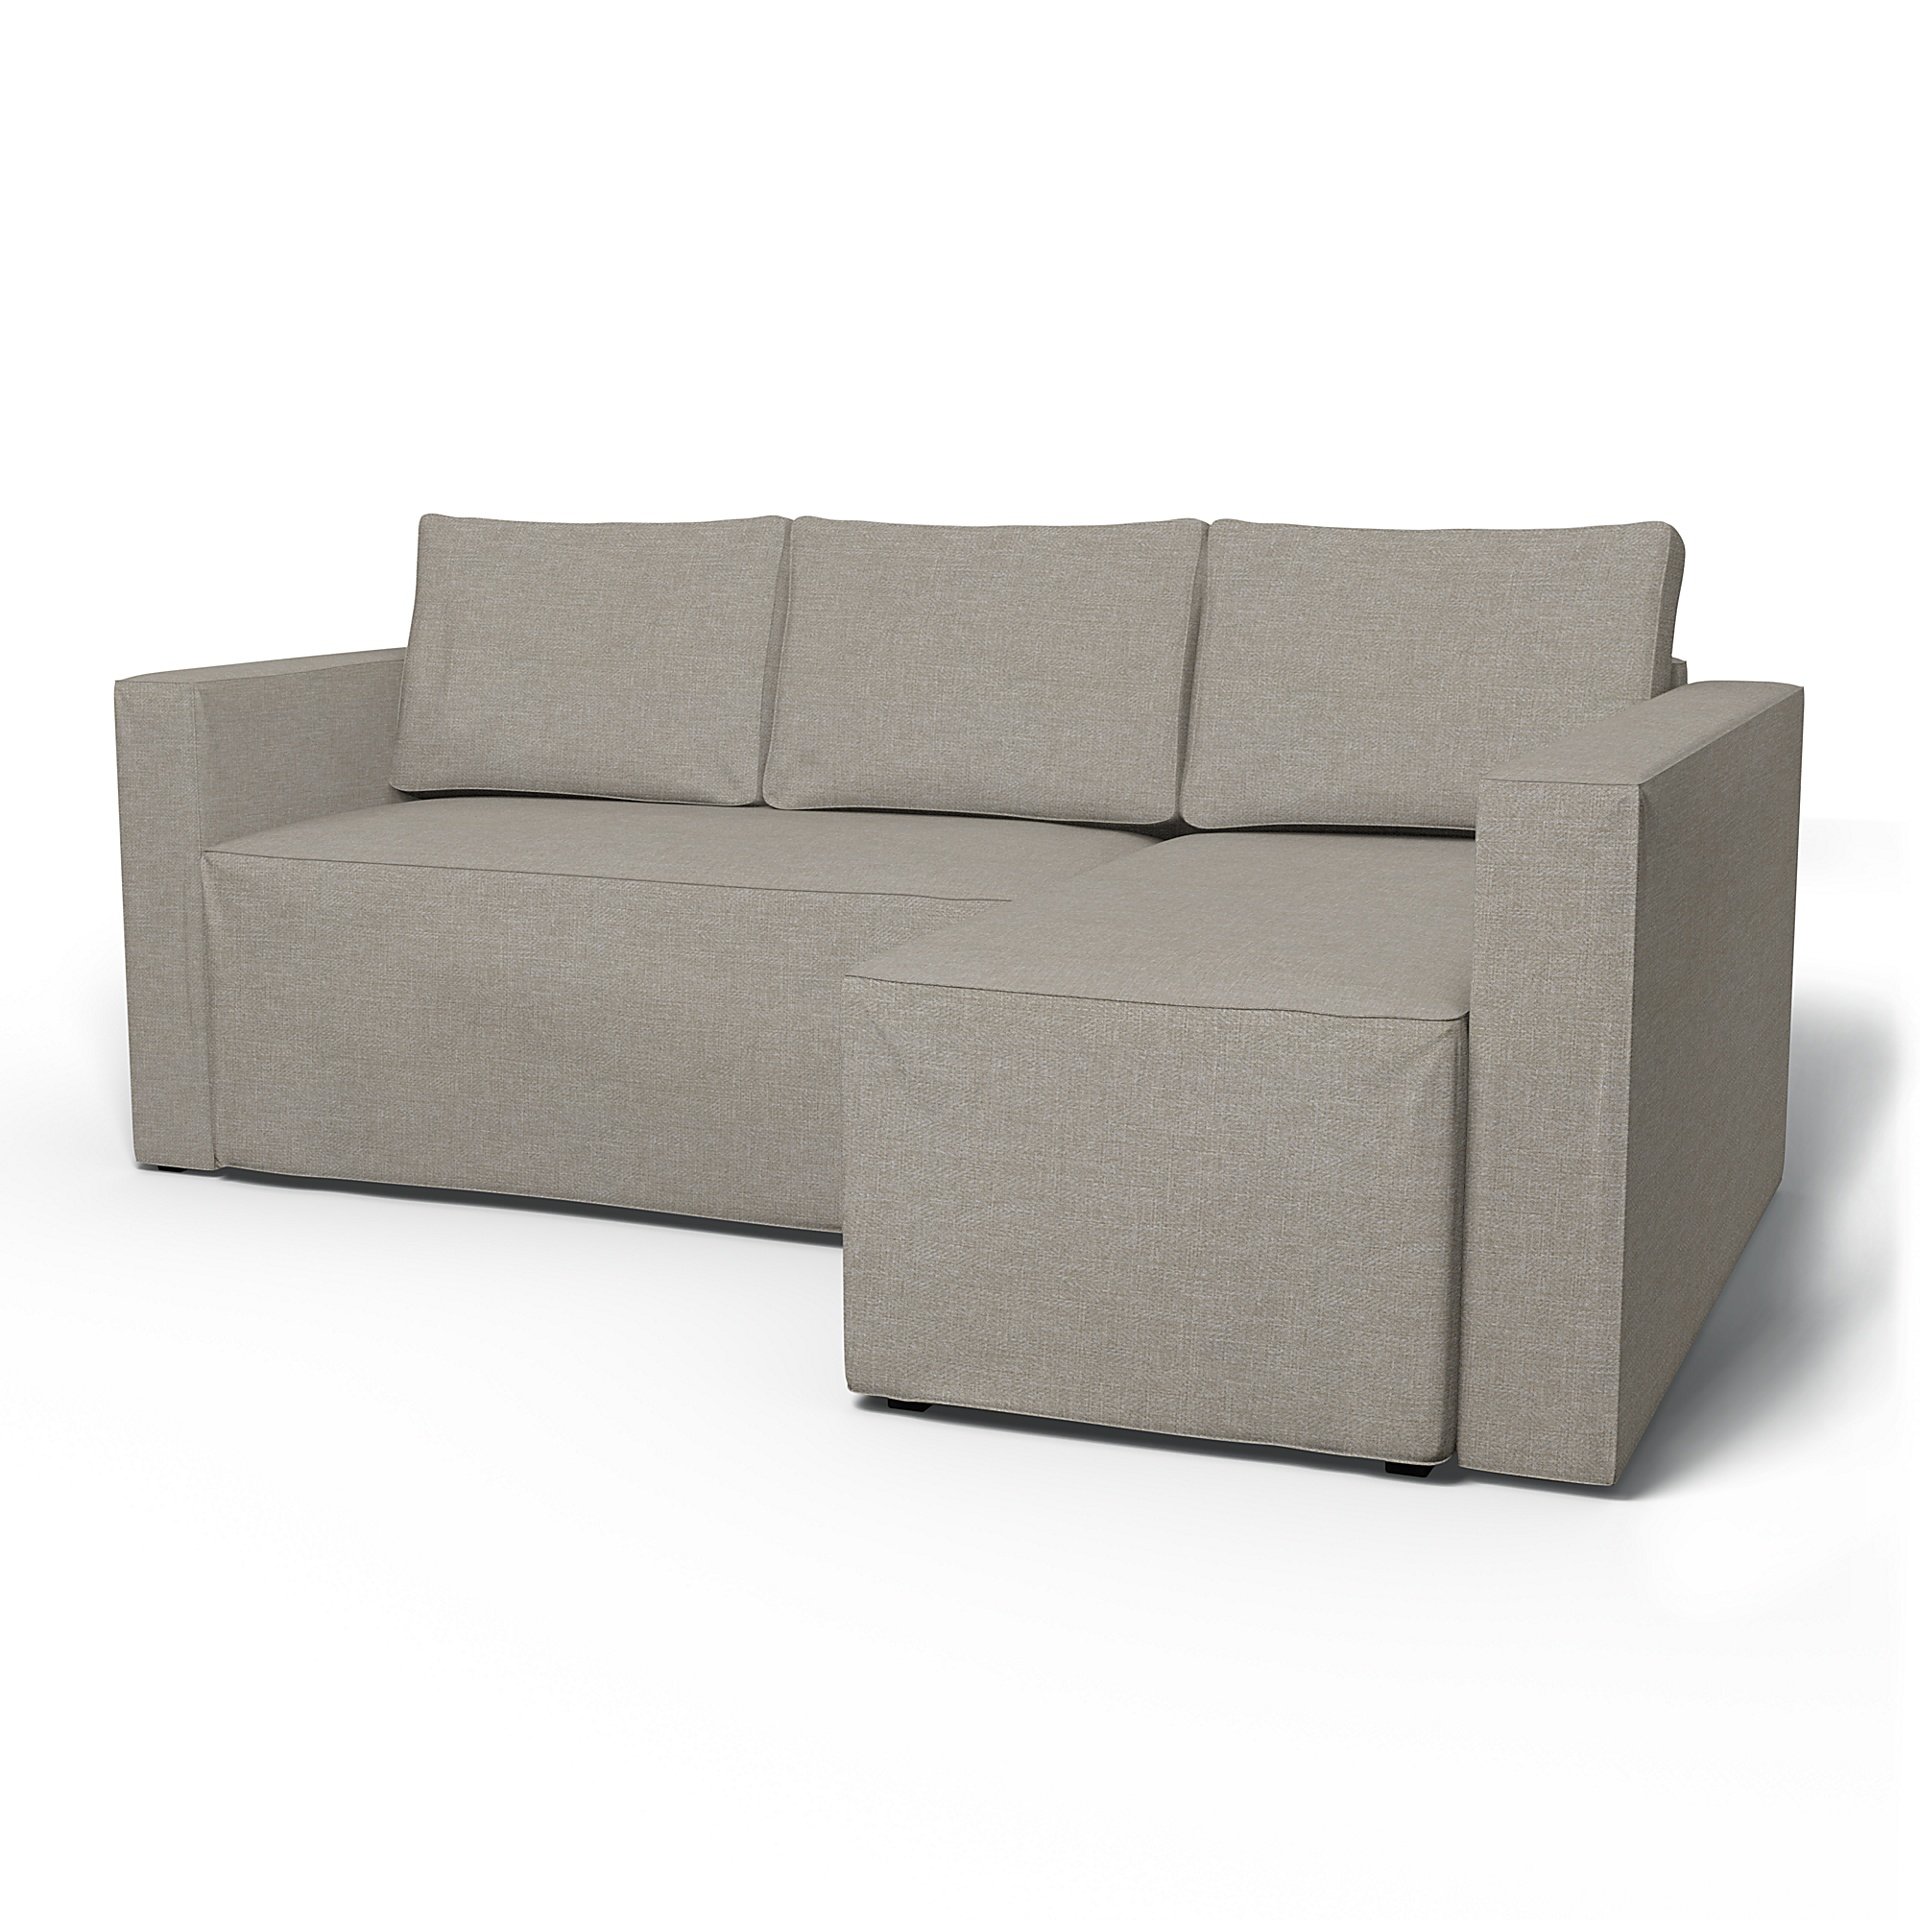 IKEA - Manstad Sofa Bed with Right Chaise Cover, Greige, Boucle & Texture - Bemz